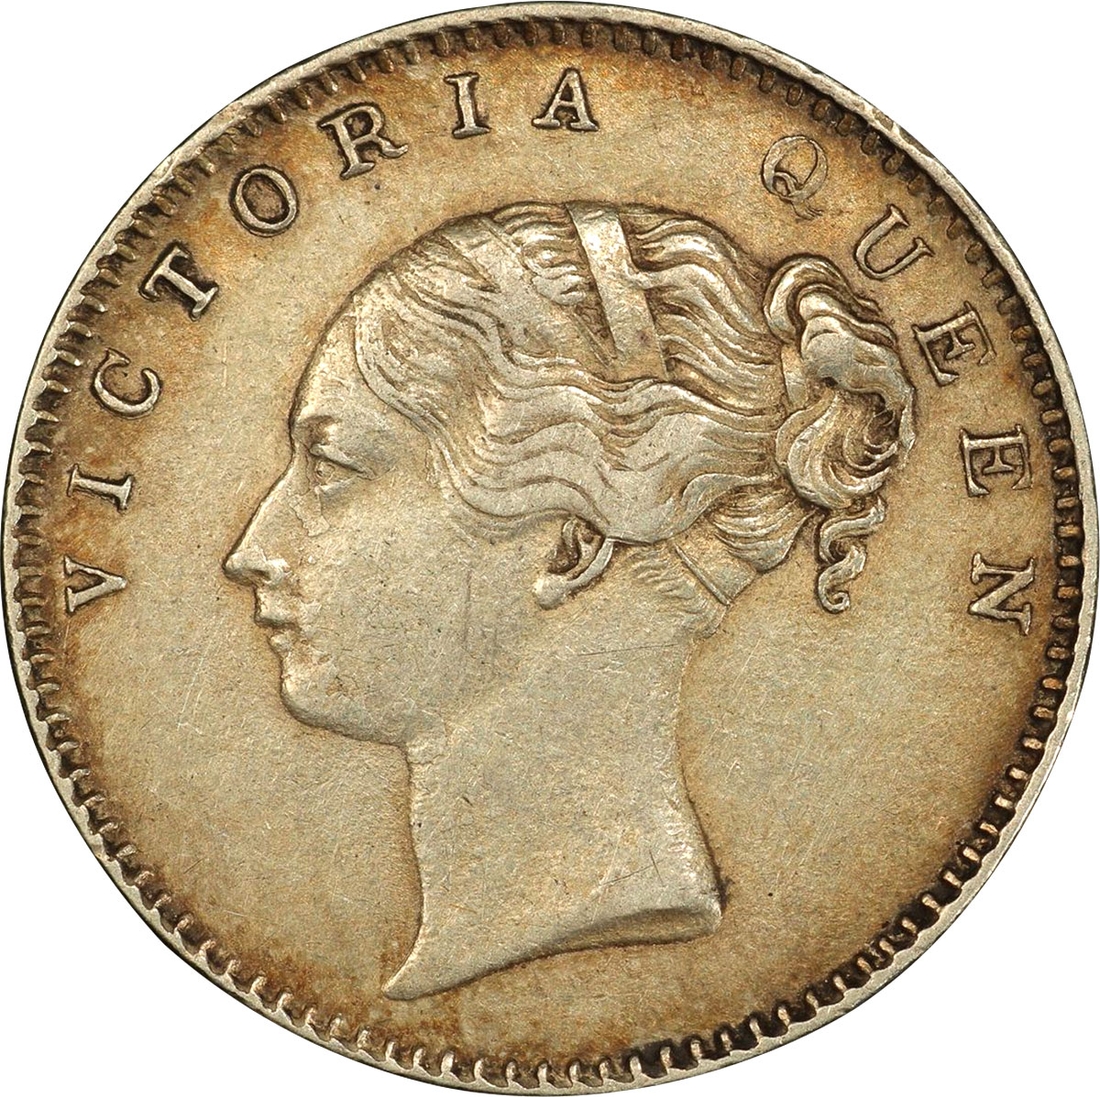 PCGS XF 45 Graded Silver Half Rupee Coin of Victoria Queen of Bombay Mint of 1840.